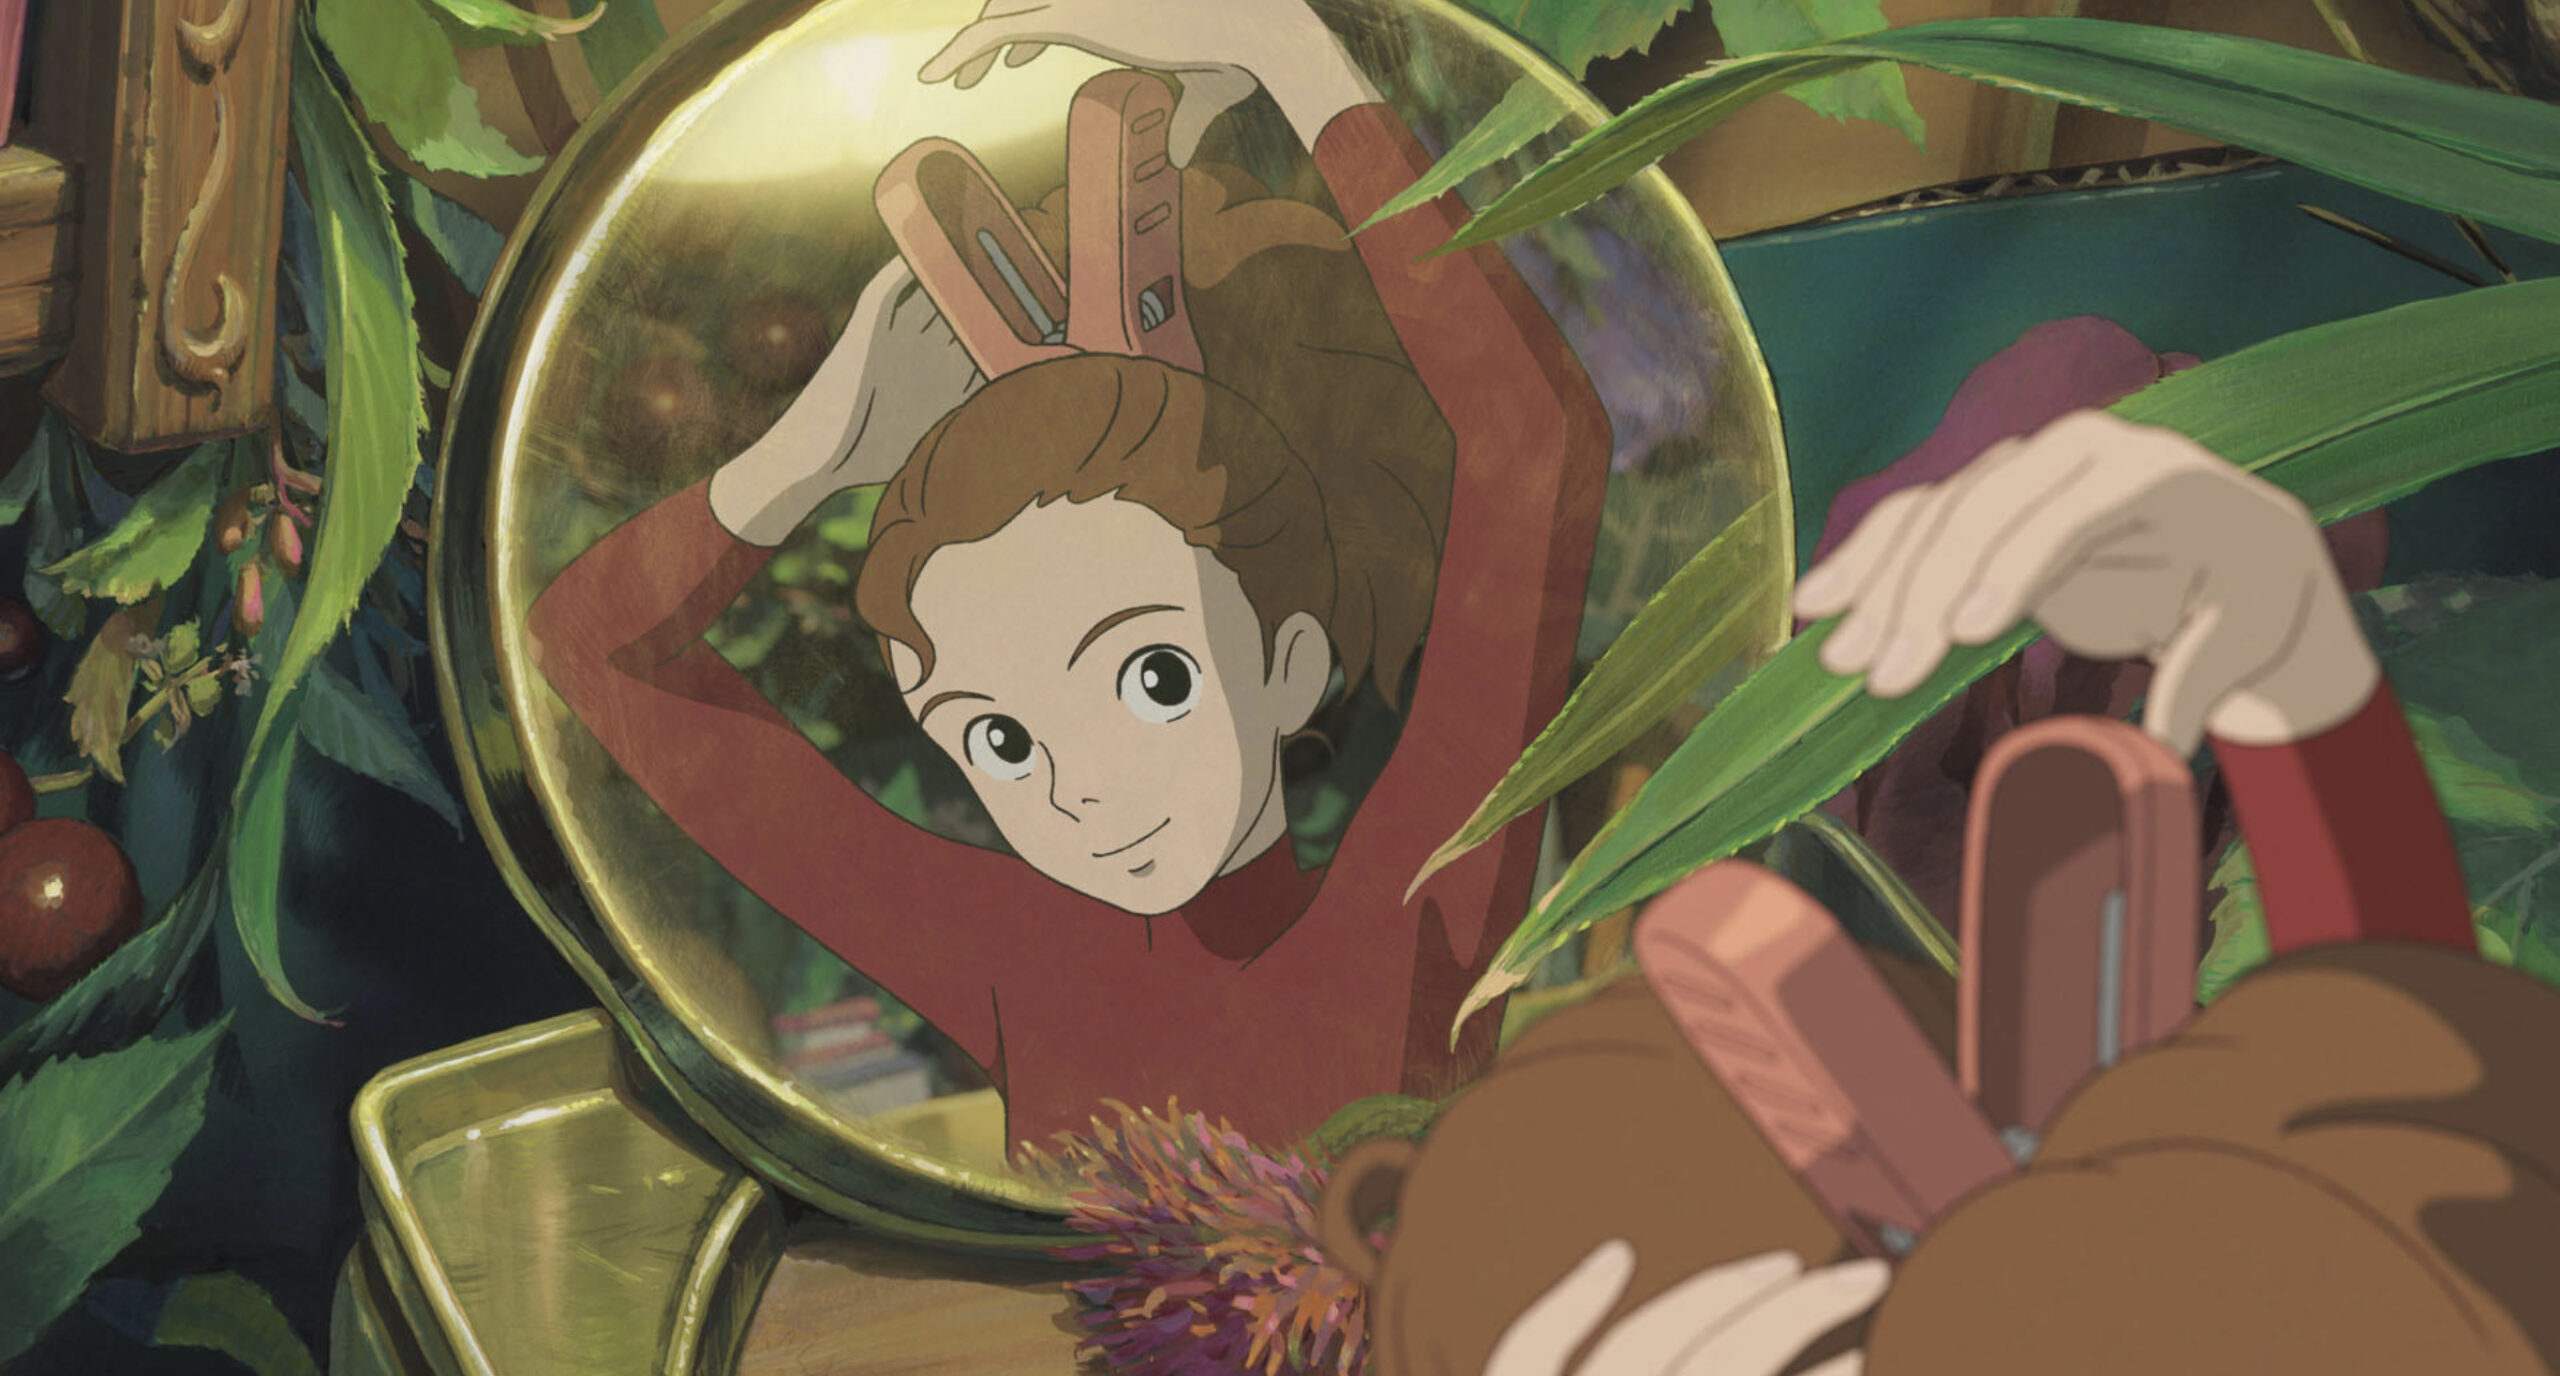 Studio ghibli shares hd images from classic films for wallpapers and more â